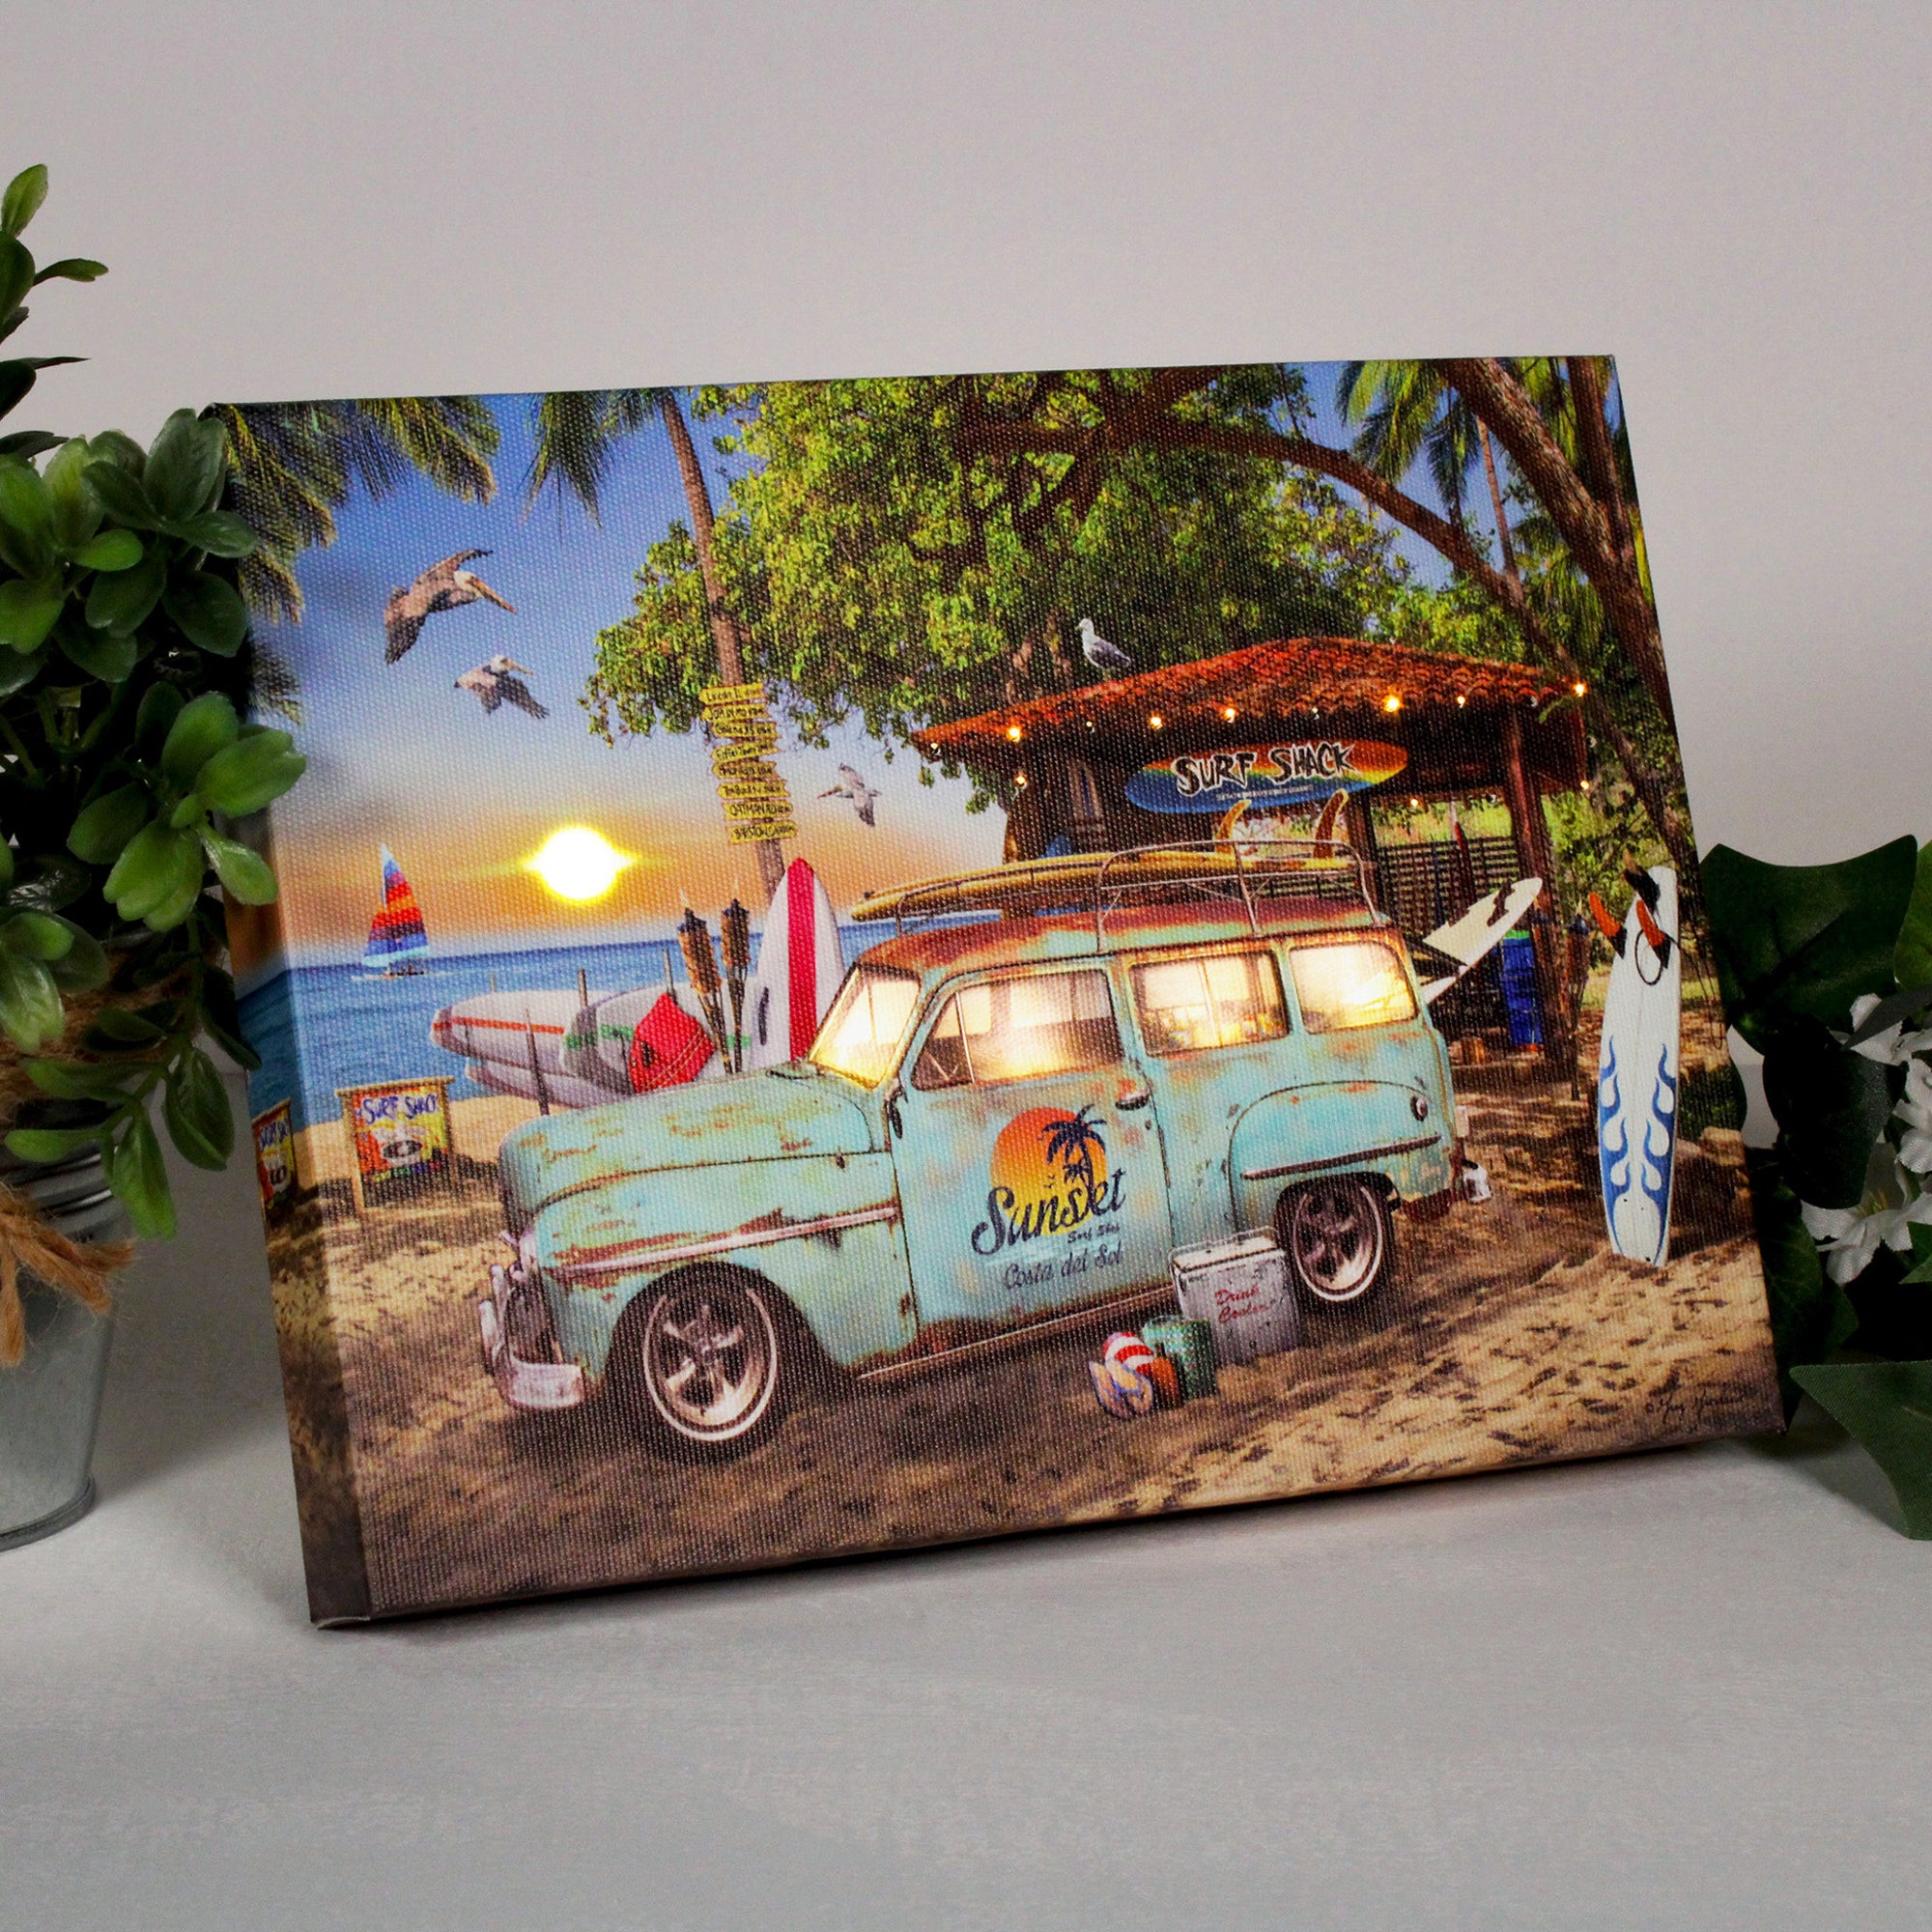 Surf Shack 8x6 Lighted Tabletop Canvas